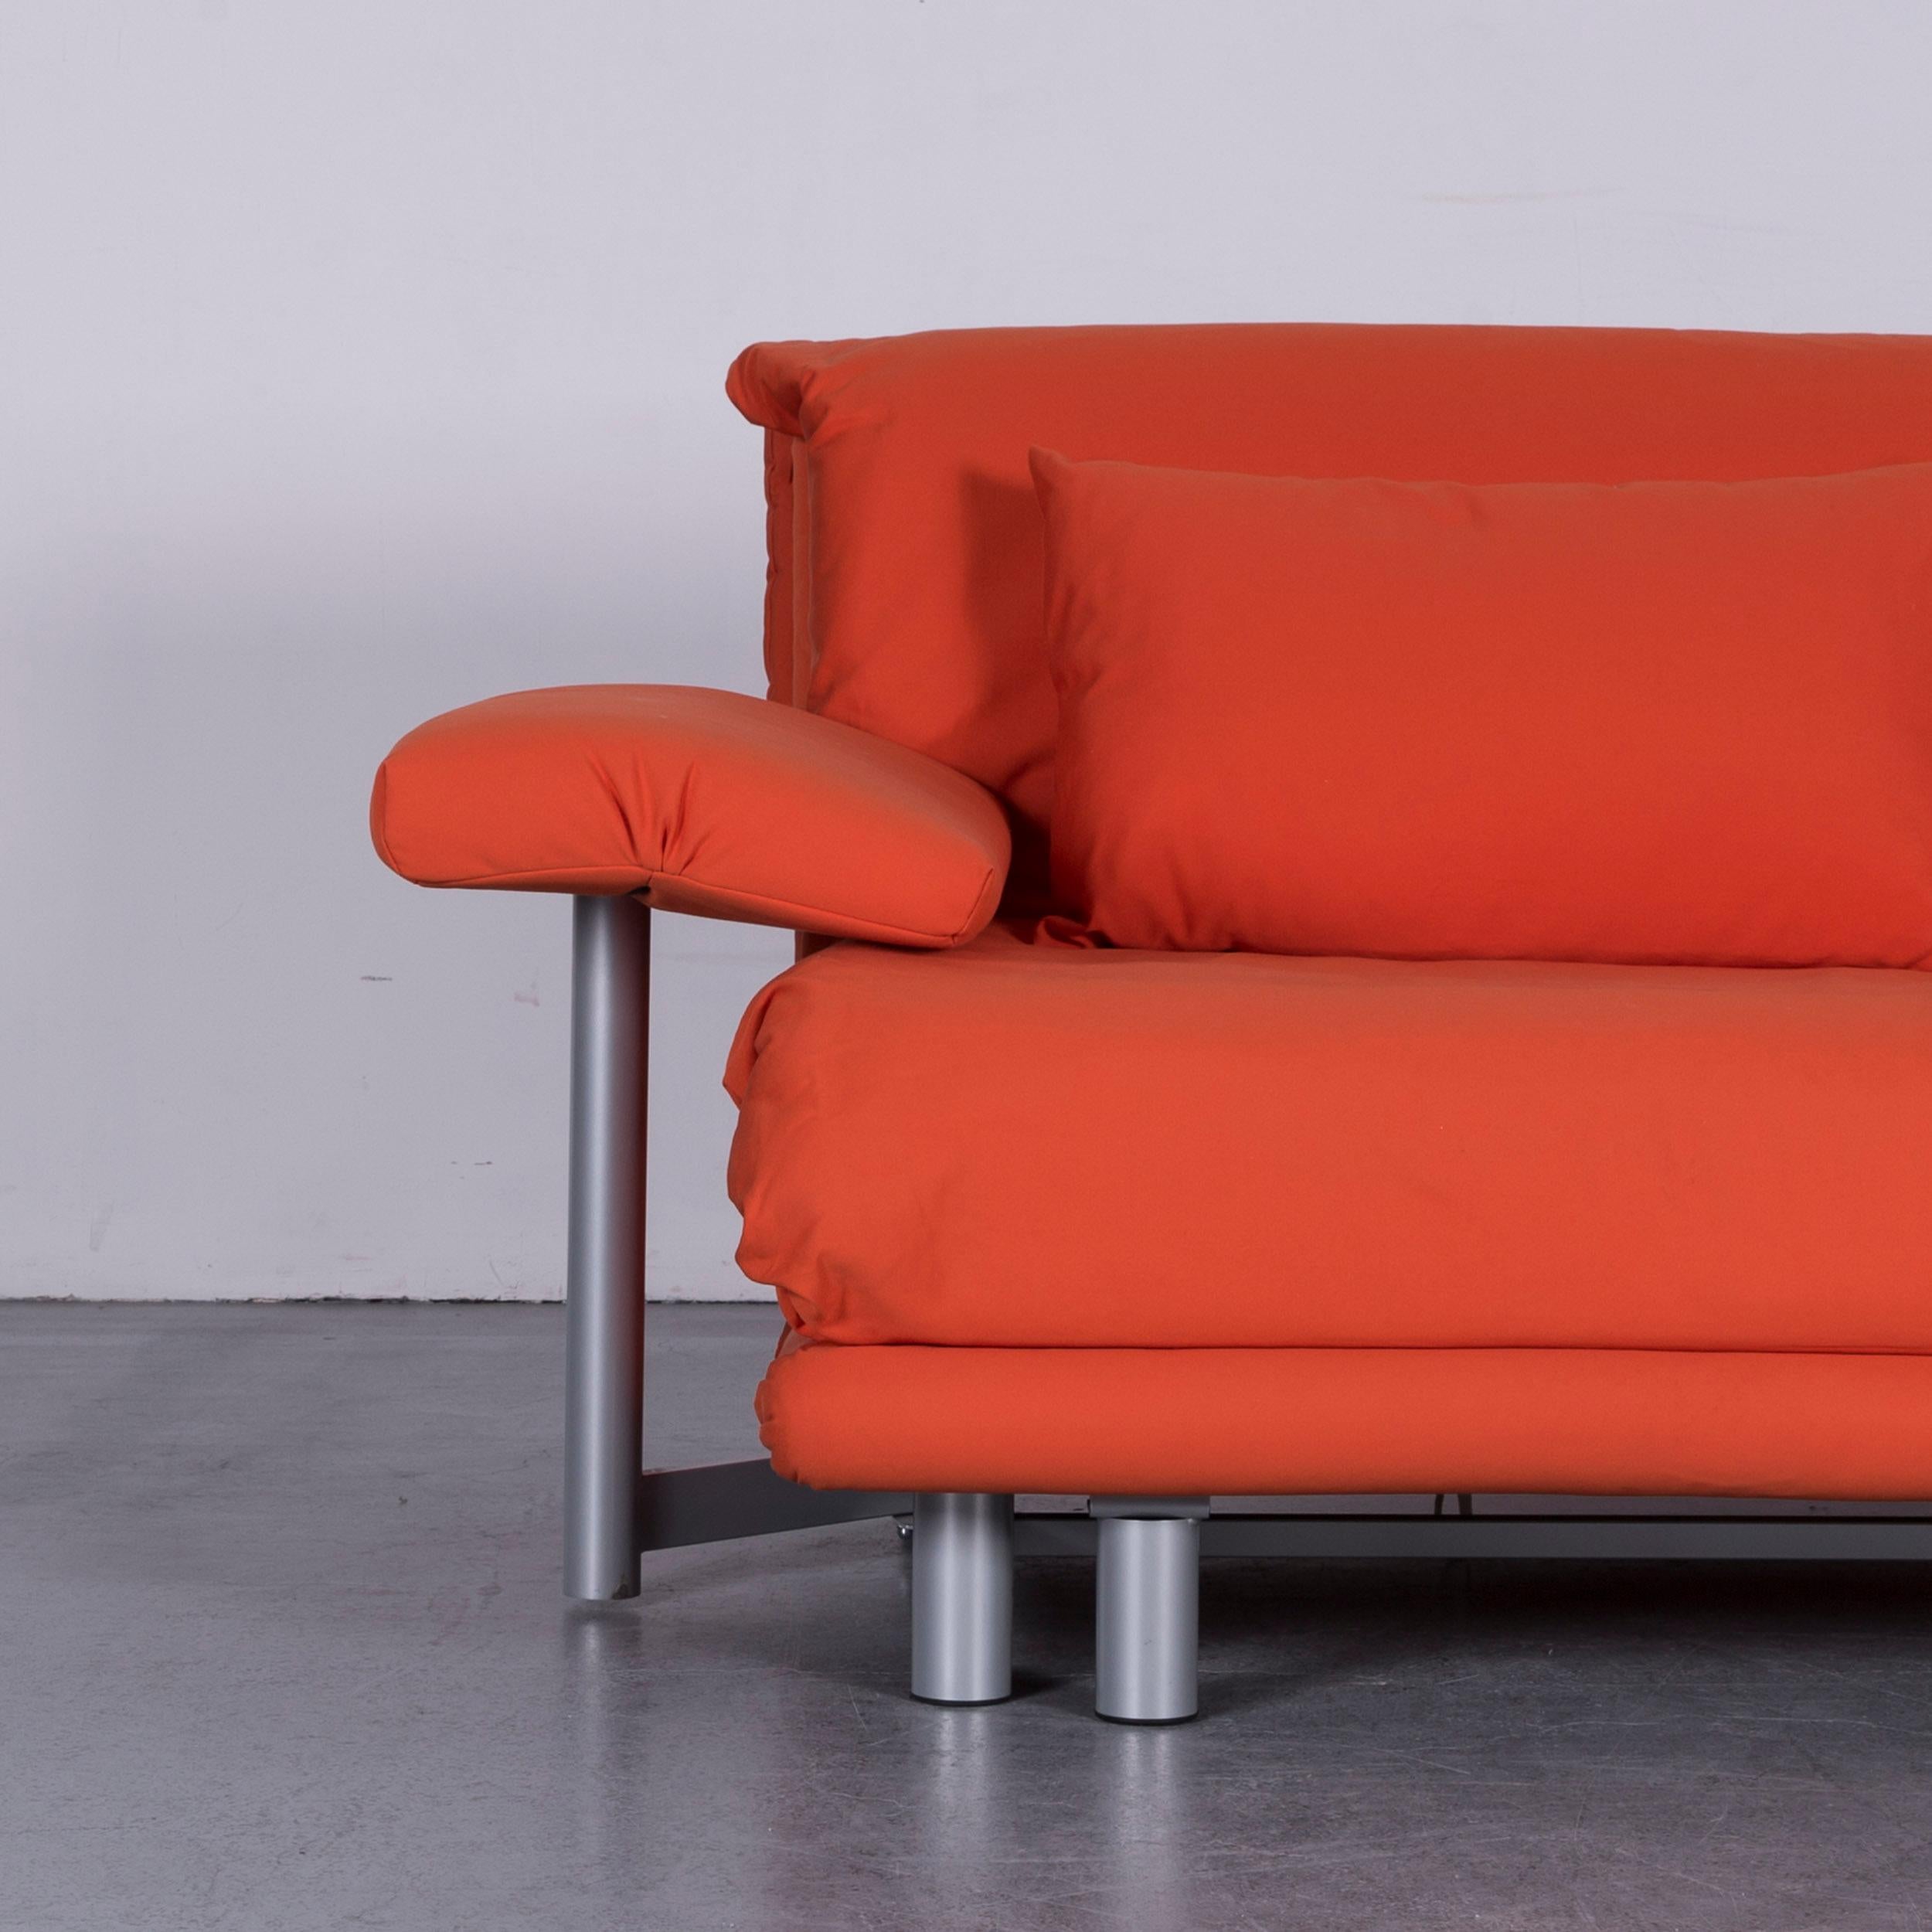 French Ligne Roset Multy Fabric Sofa-Bed Orange Two-Seat Couch Sleep Function